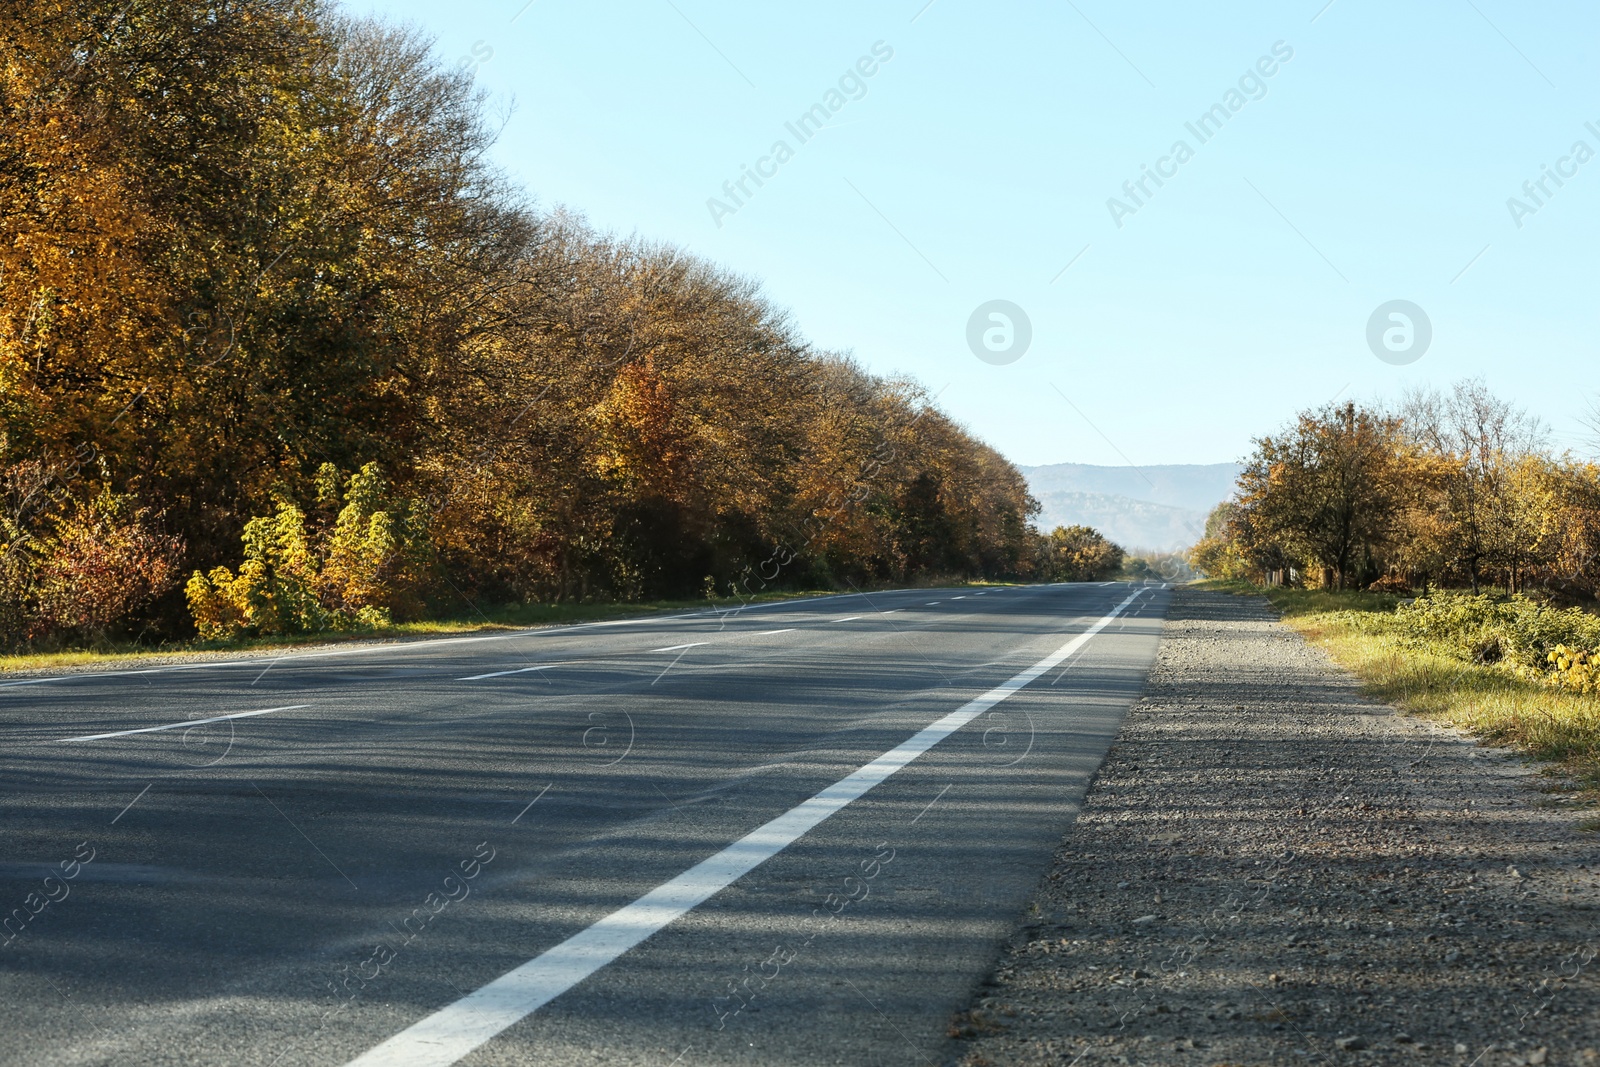 Photo of Asphalt road running through countryside on sunny day